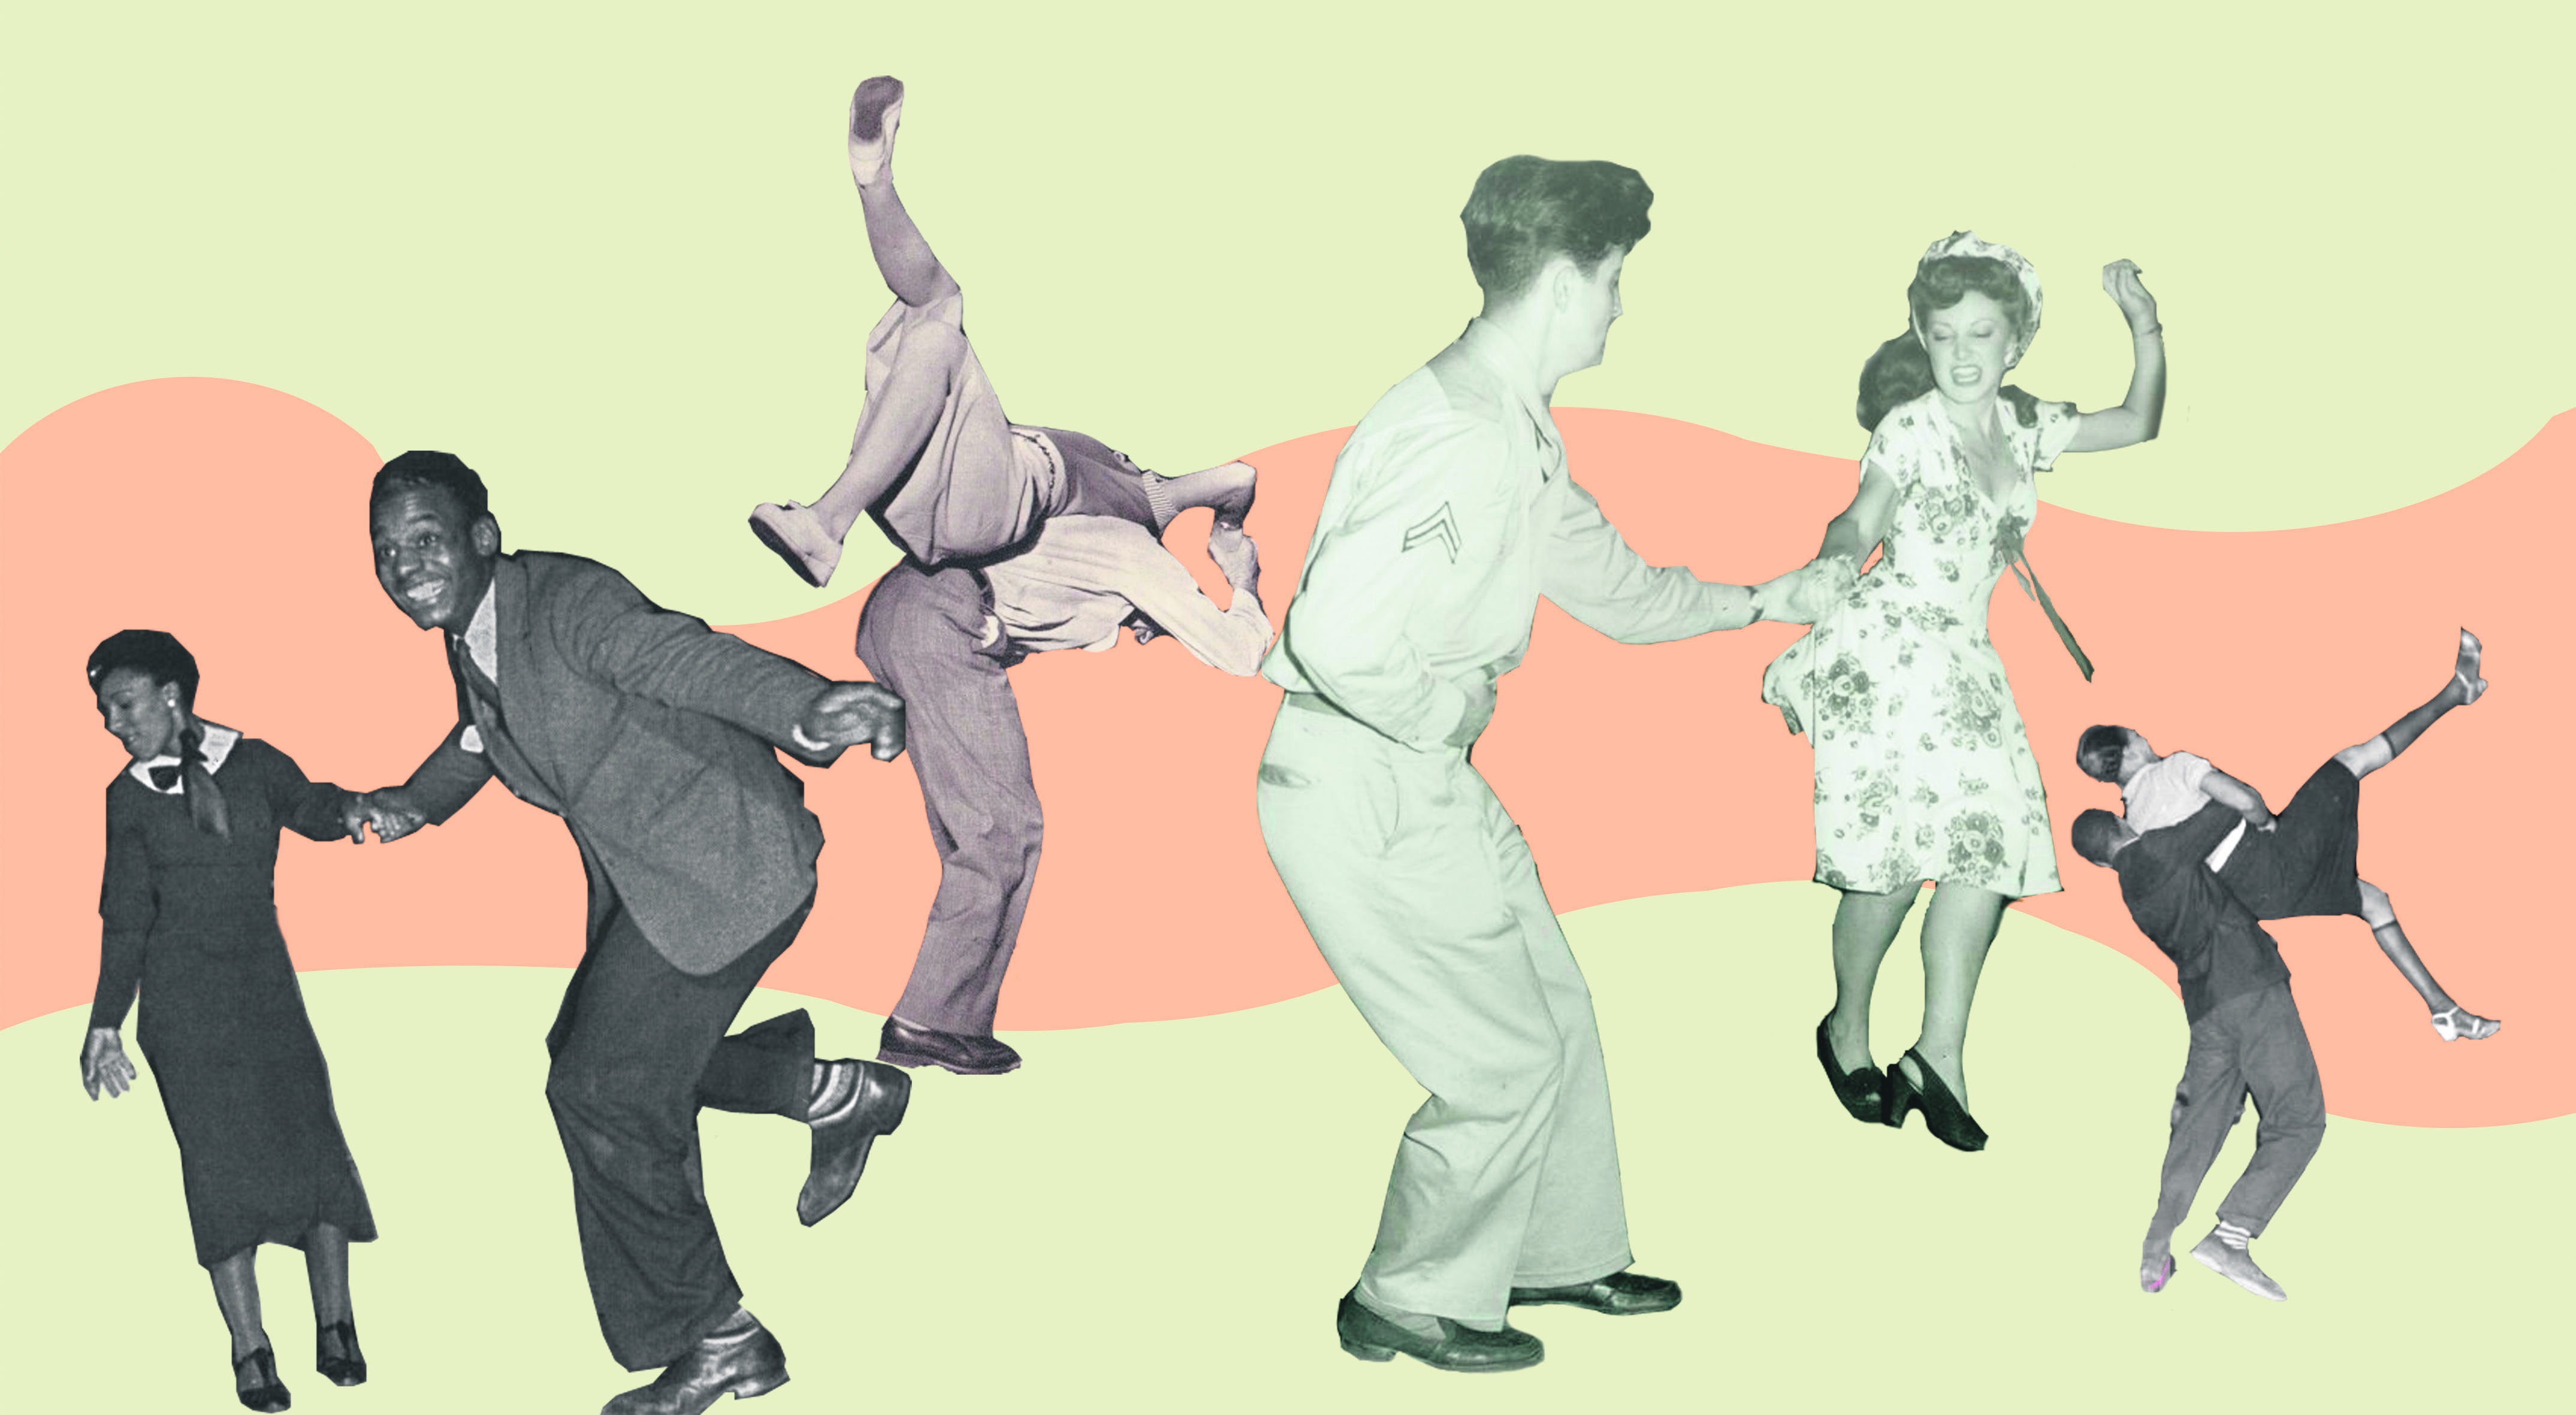 You can learn the subtlety, rhythms and first steps of swing dancing, which became popular with Hollywood movies in 1920s.